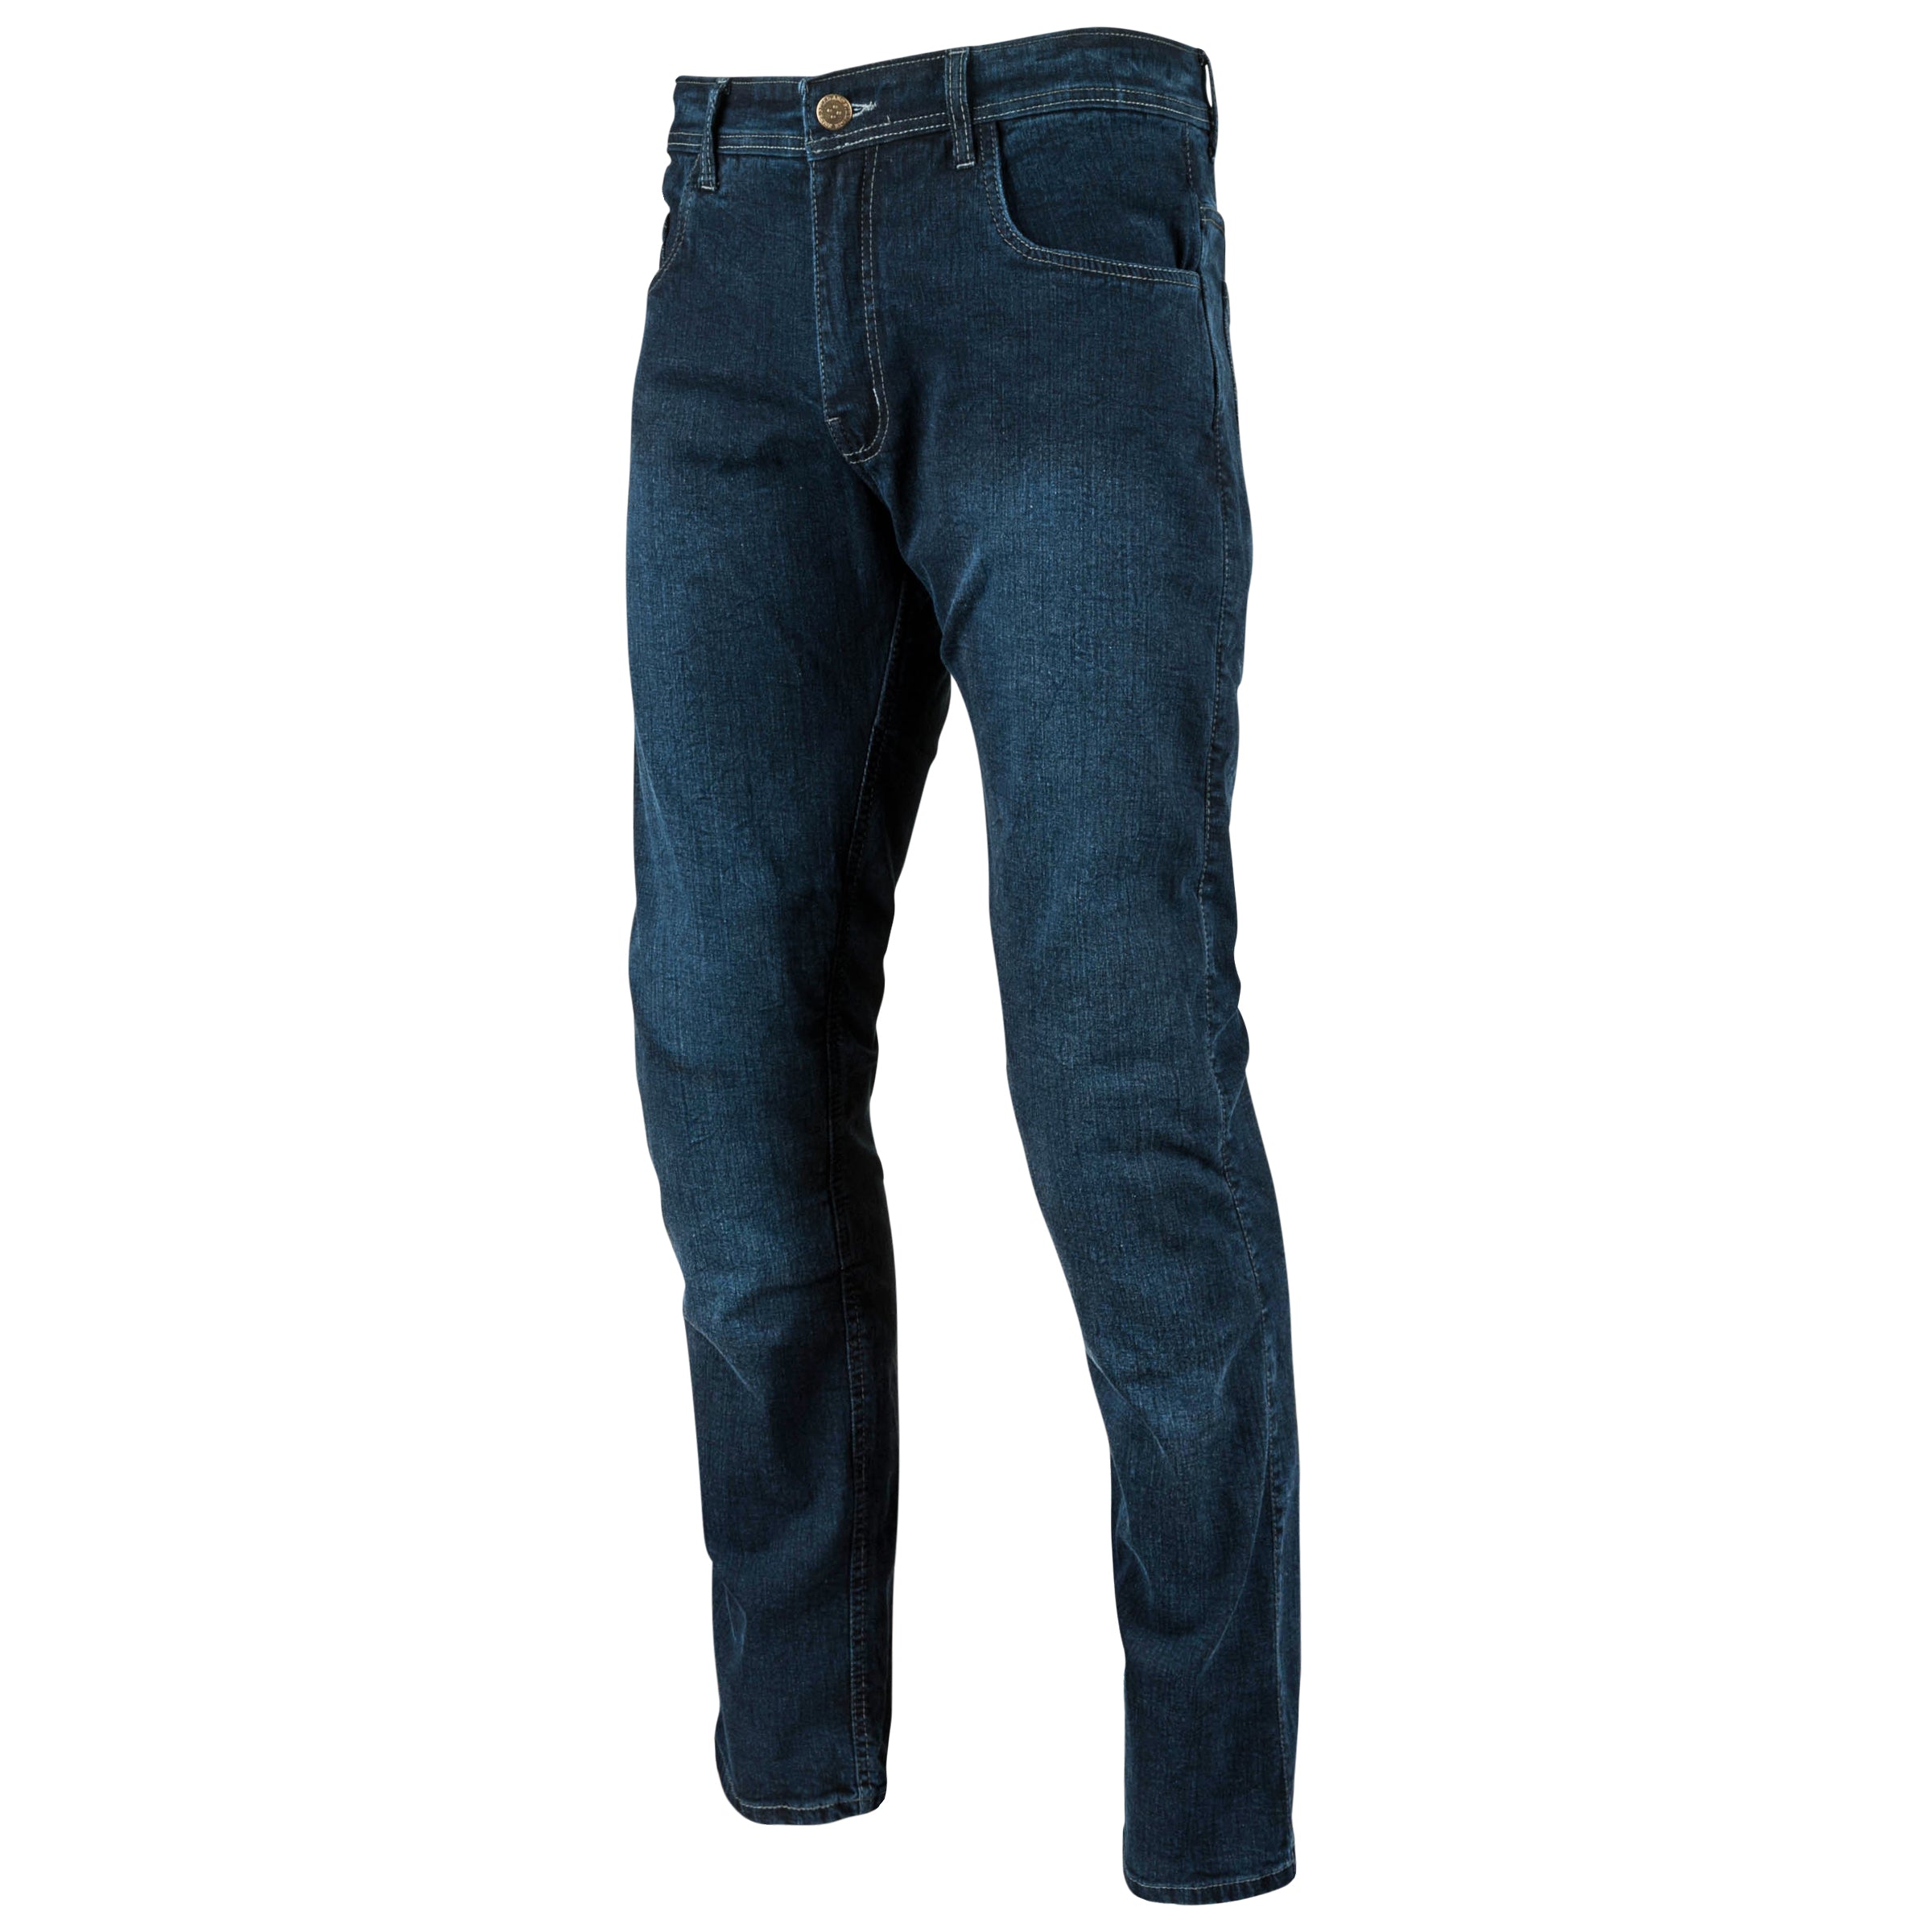 Mens Blue Motorcycle Jeans Fully Lined w/ DuPont™ Kevlar® Size 26 to 28